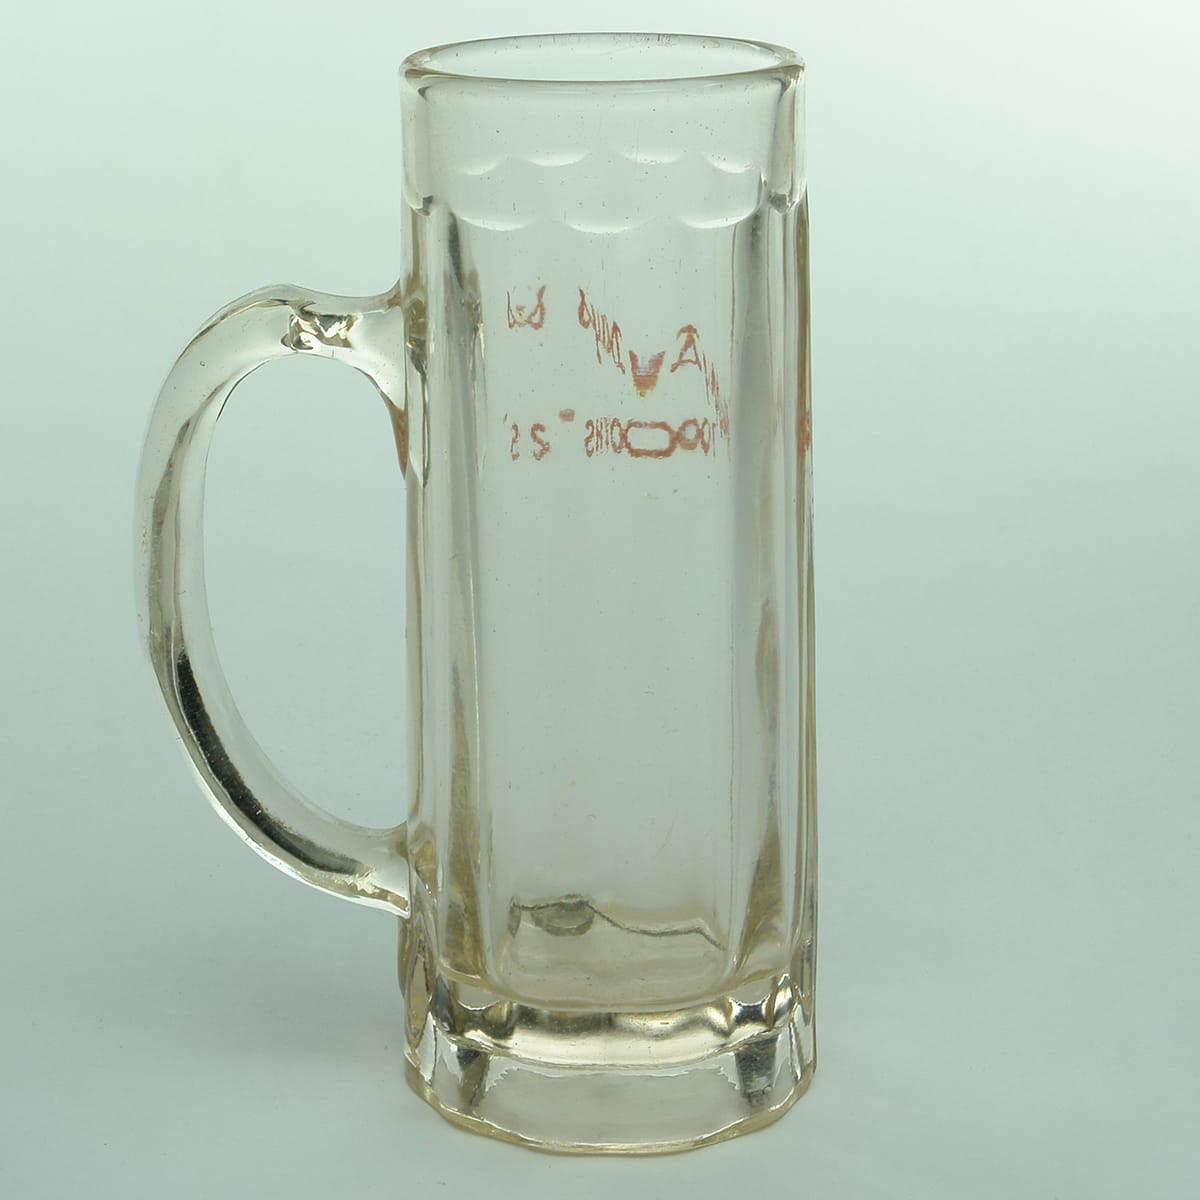 Tall Beer Mug. Happy Days, Tooths. Red print. Plus a letter from Tooth & Co., Lapel pin and an early receipt. (New South Wales)